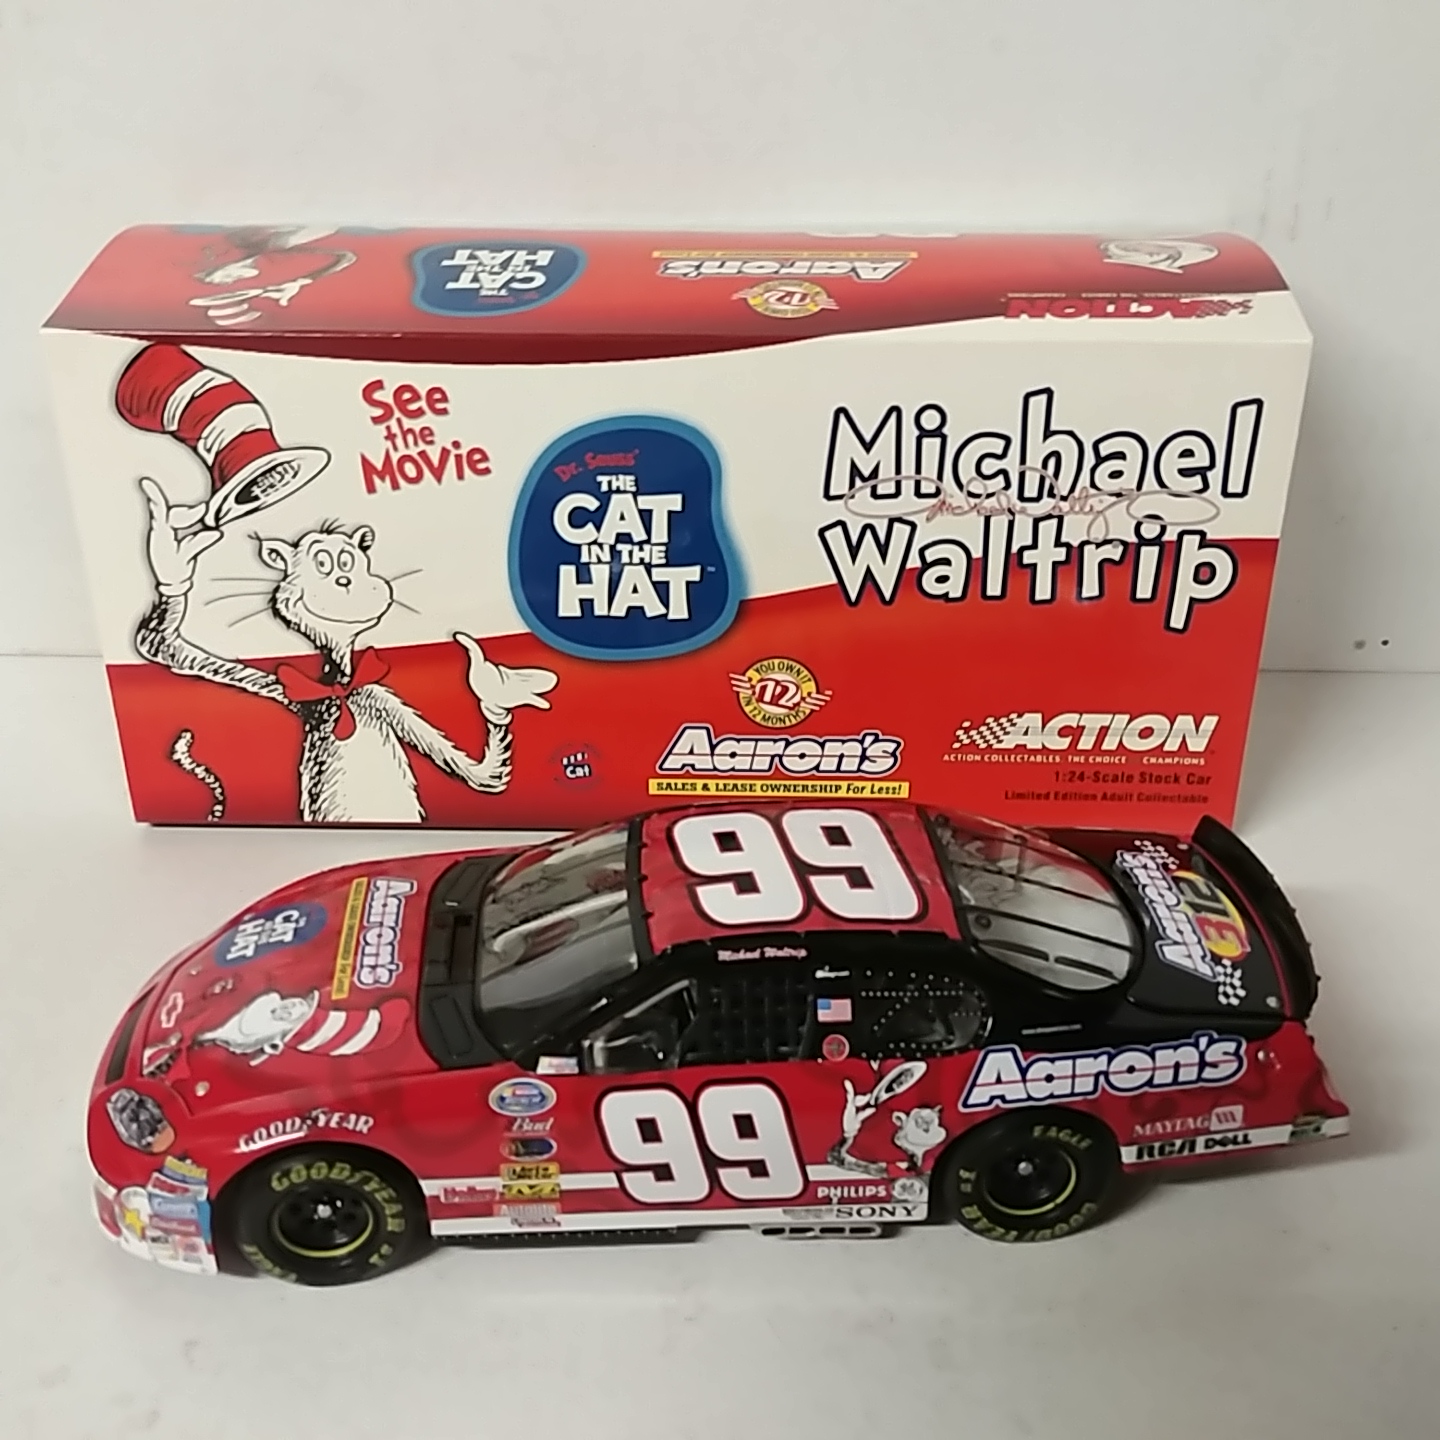 2003 Michael Waltrip 1/24th Aarons "Cat in the Hat""Busch Series" c/w car